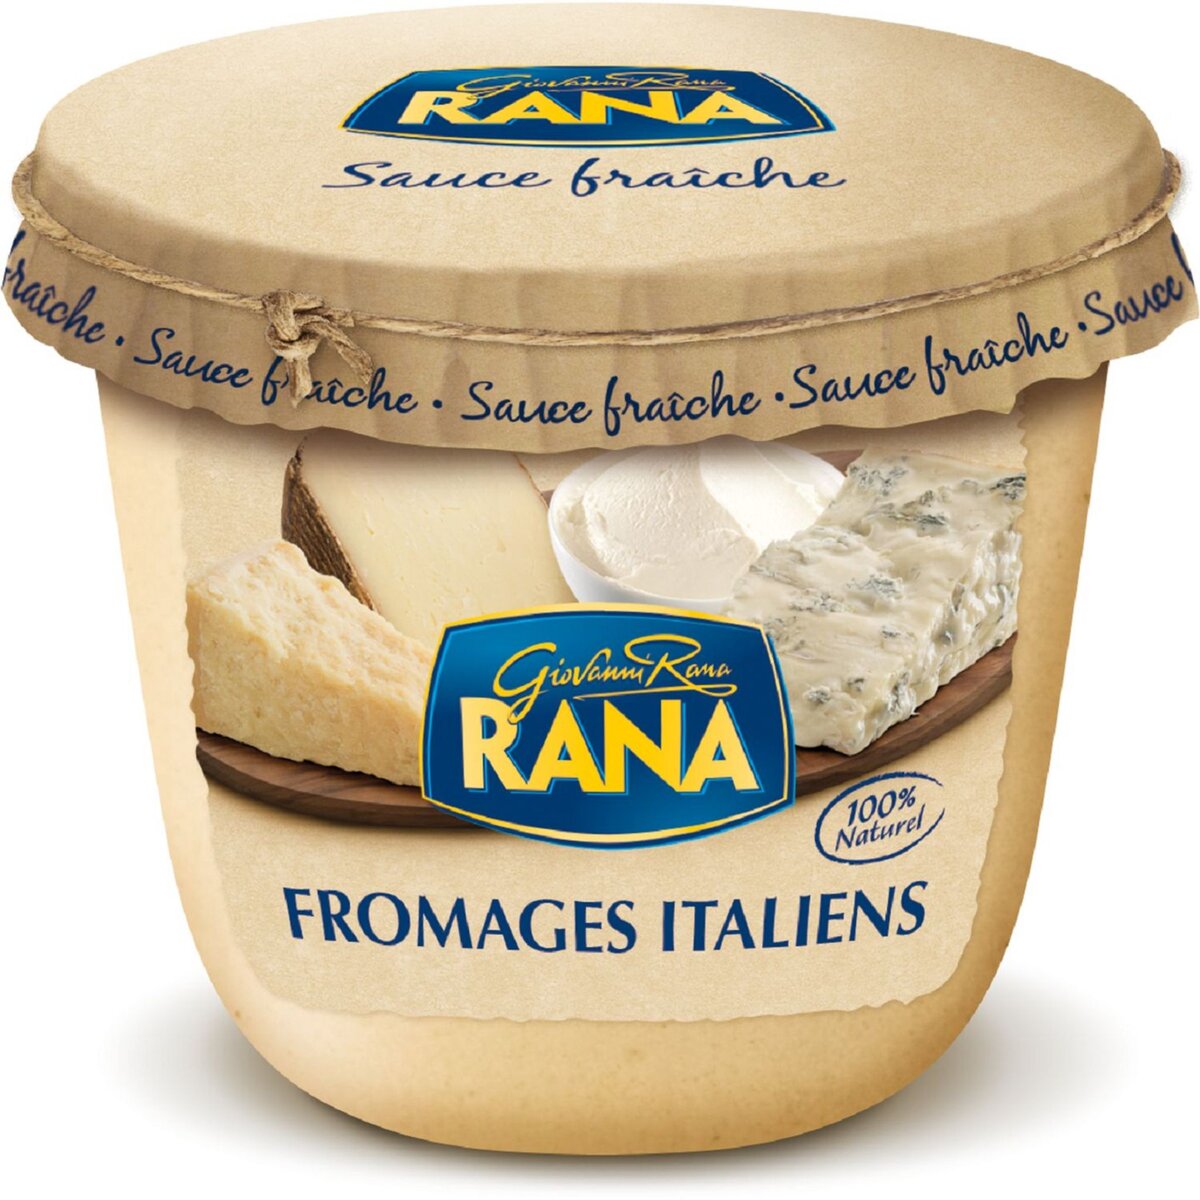 RANA Sauce au fromages italiens 180g